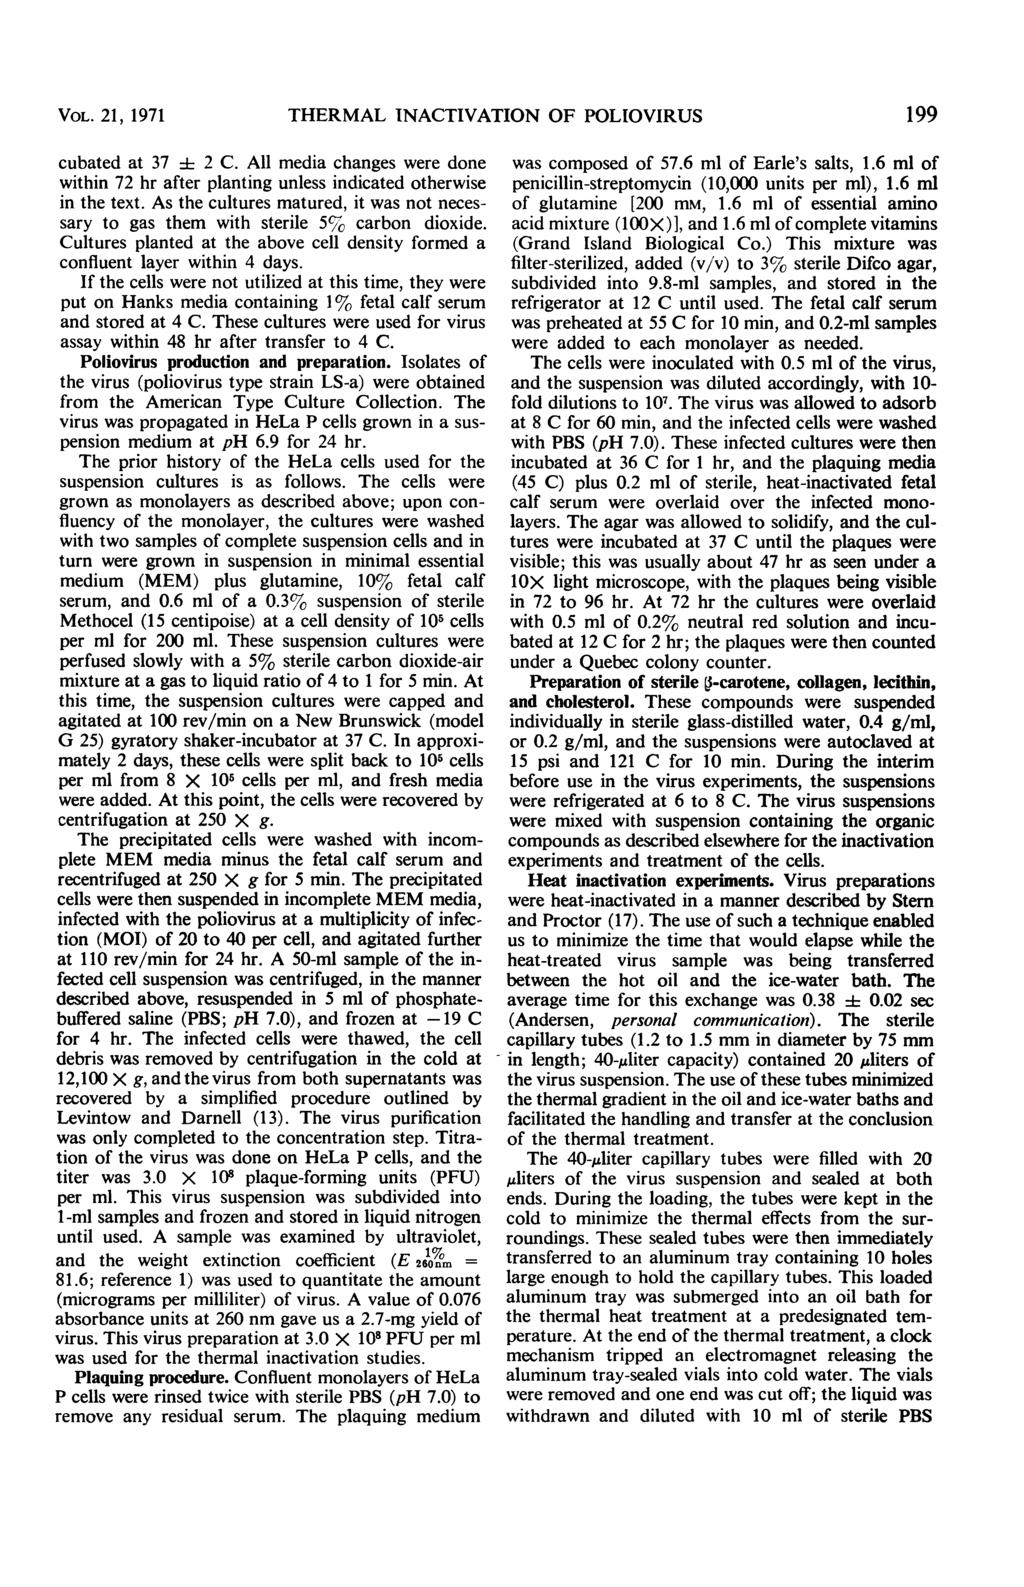 VOL. 21, 1971 THERMAL INACTIVATION OF POLIOVIRUS 199 cubated at 37 :+1 2 C. All media changes were done within 72 hr after planting unless indicated otherwise in the text.